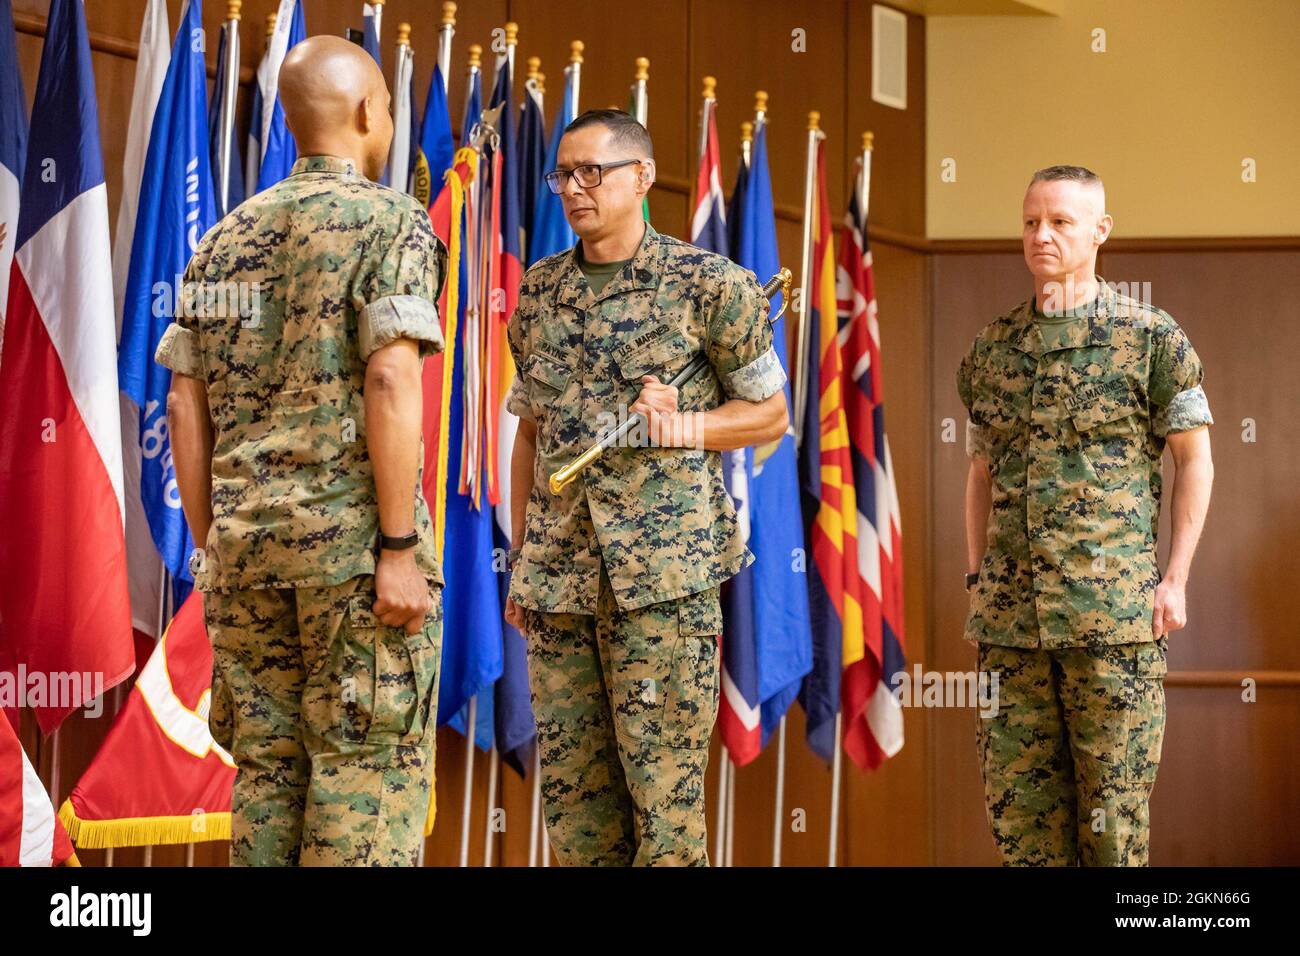 Sgt. Maj. Michael Payne (middle), sergeant major, Force Headquarters Group (FHG), prepares to pass a noncommissioned officer's sword during a relief and appointment ceremony at Marine Corps Support Facility New Orleans on June 3, 2021. Stock Photo